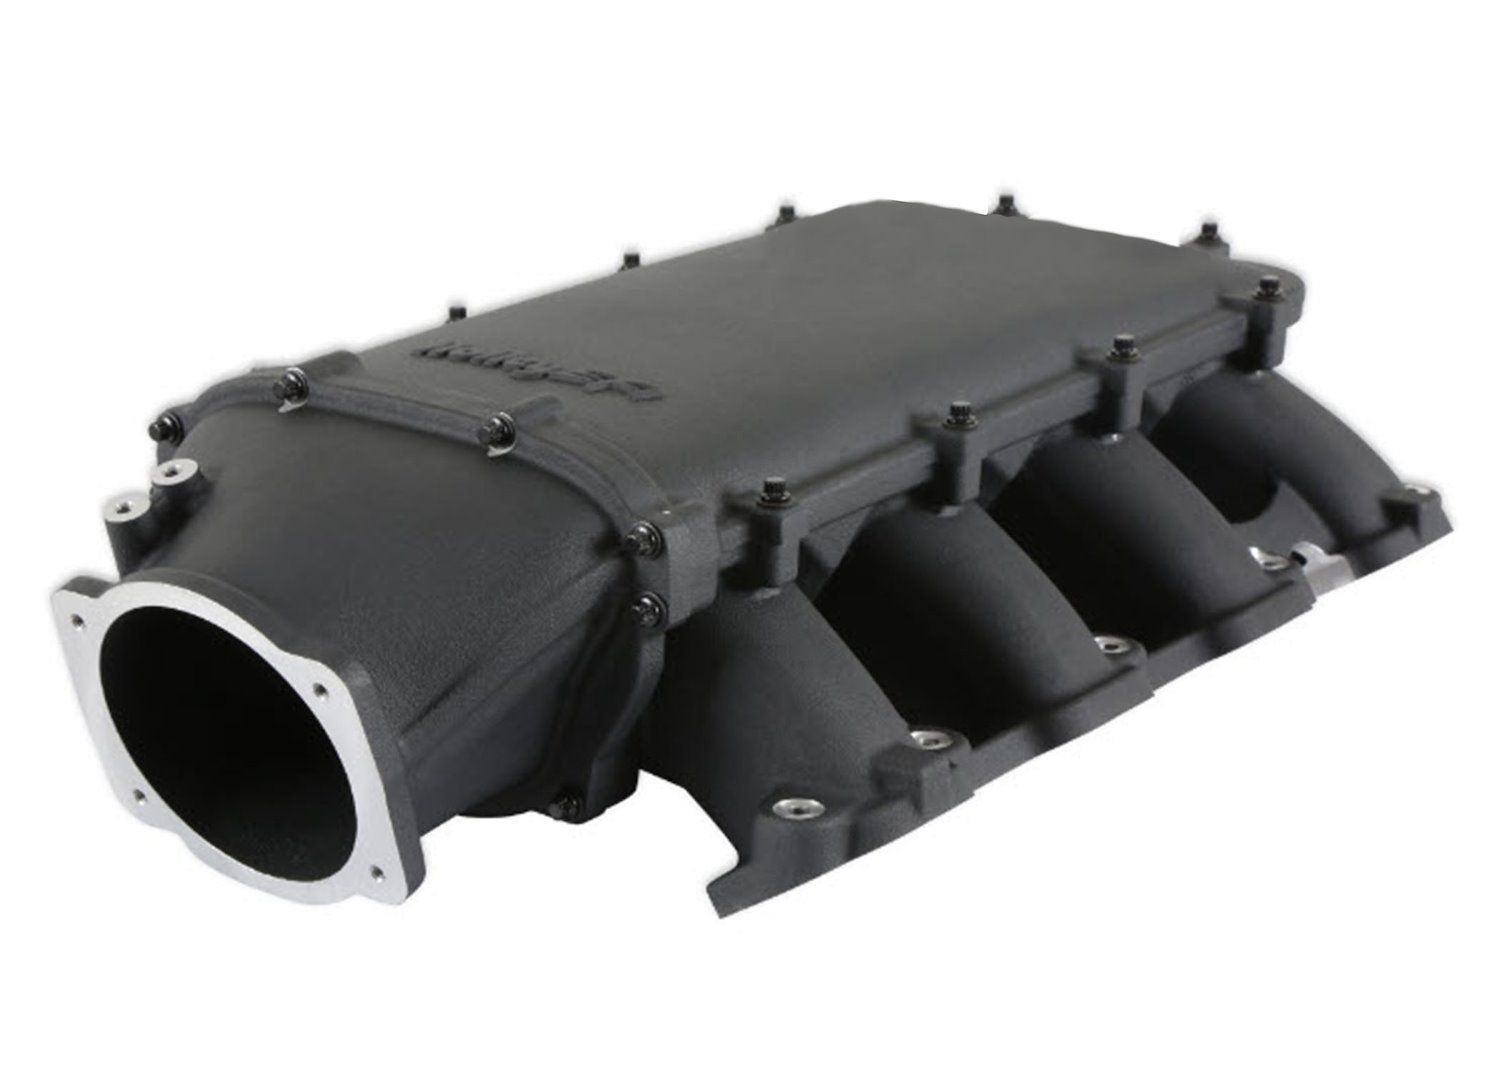 Ultra Lo-Ram Intake Manifold for Direct Injected GM